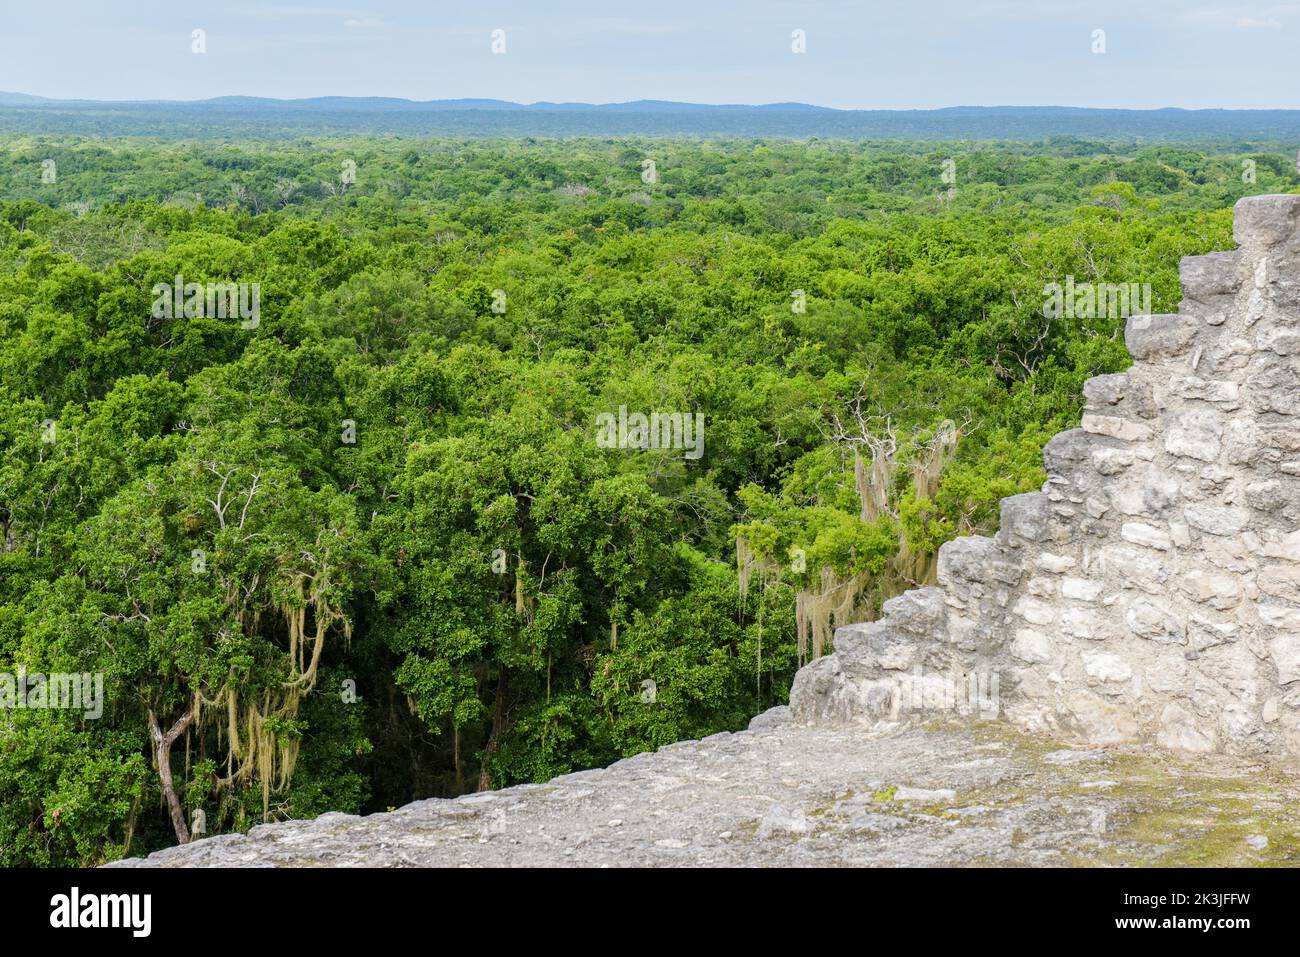 View of the jungle from the top of a pyramid, Calakmul, Mayan archaeological site, Campeche state, Mexico Stock Photo